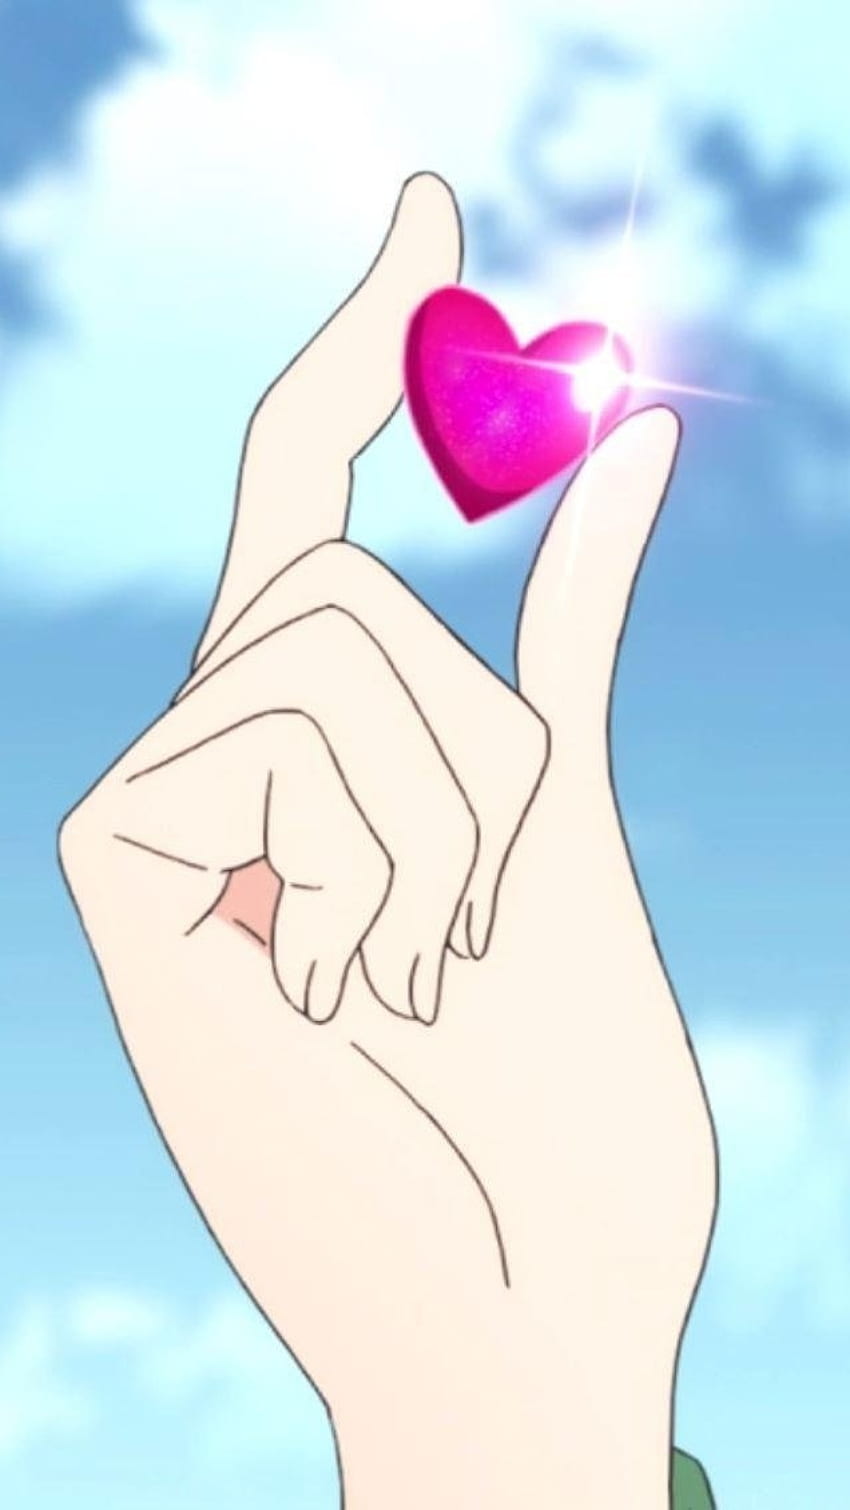 Uhm Ok I guess#Matching Anime Heart Hands#Anime#xyzcba #fypppppppppppp... |  TikTok